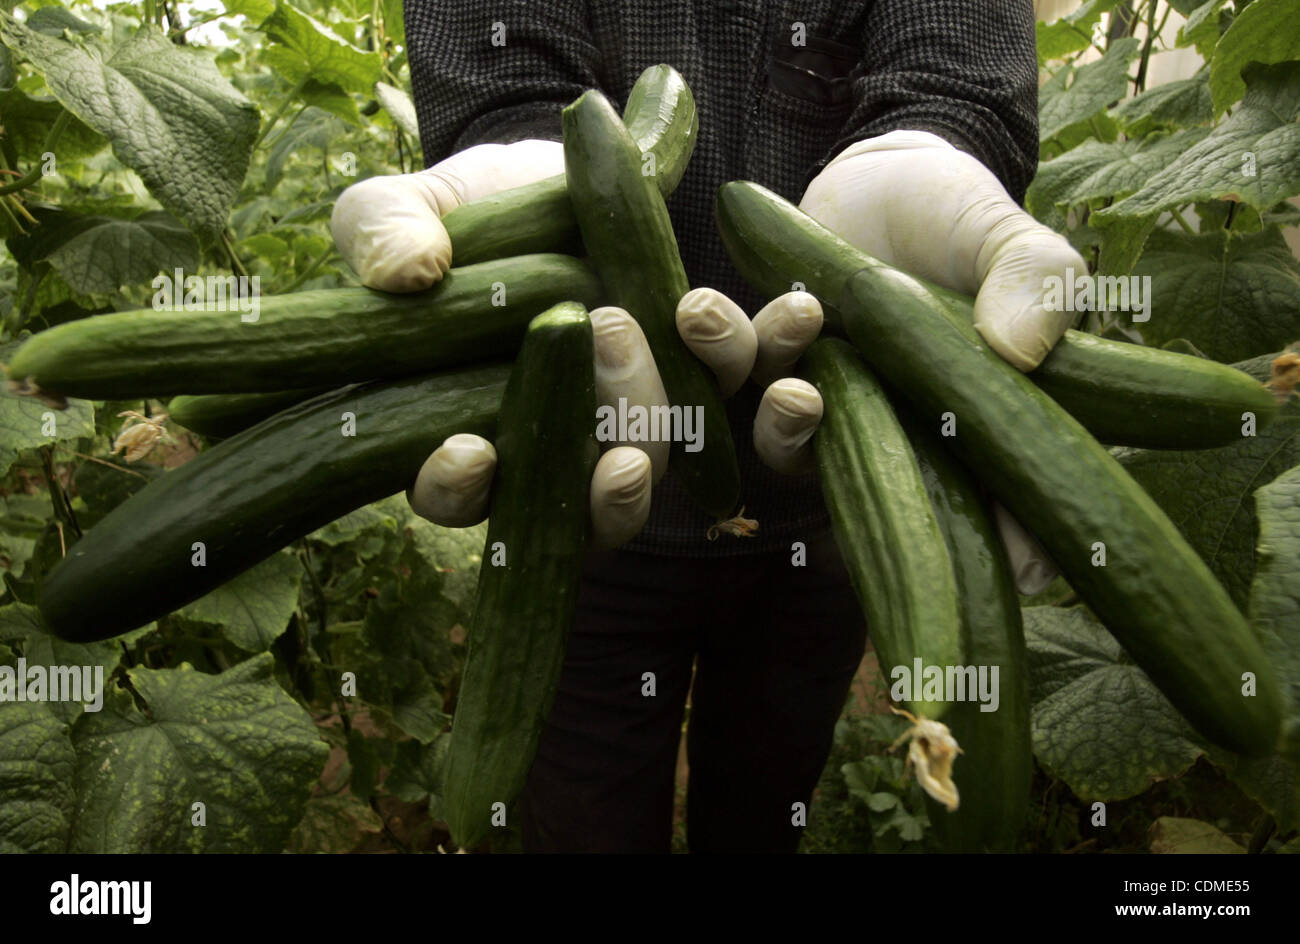 A Palestinian farmer harvests cucumber from his farm in Rafah, southern Gaza Strip on April 11, 2011. Gaza's farmers are entering their fifth year of export restrictions, imposed by Israel after the Islamic Hamas party took control of the impoverished strip. Photo by Abed Rahim Khatib Stock Photo